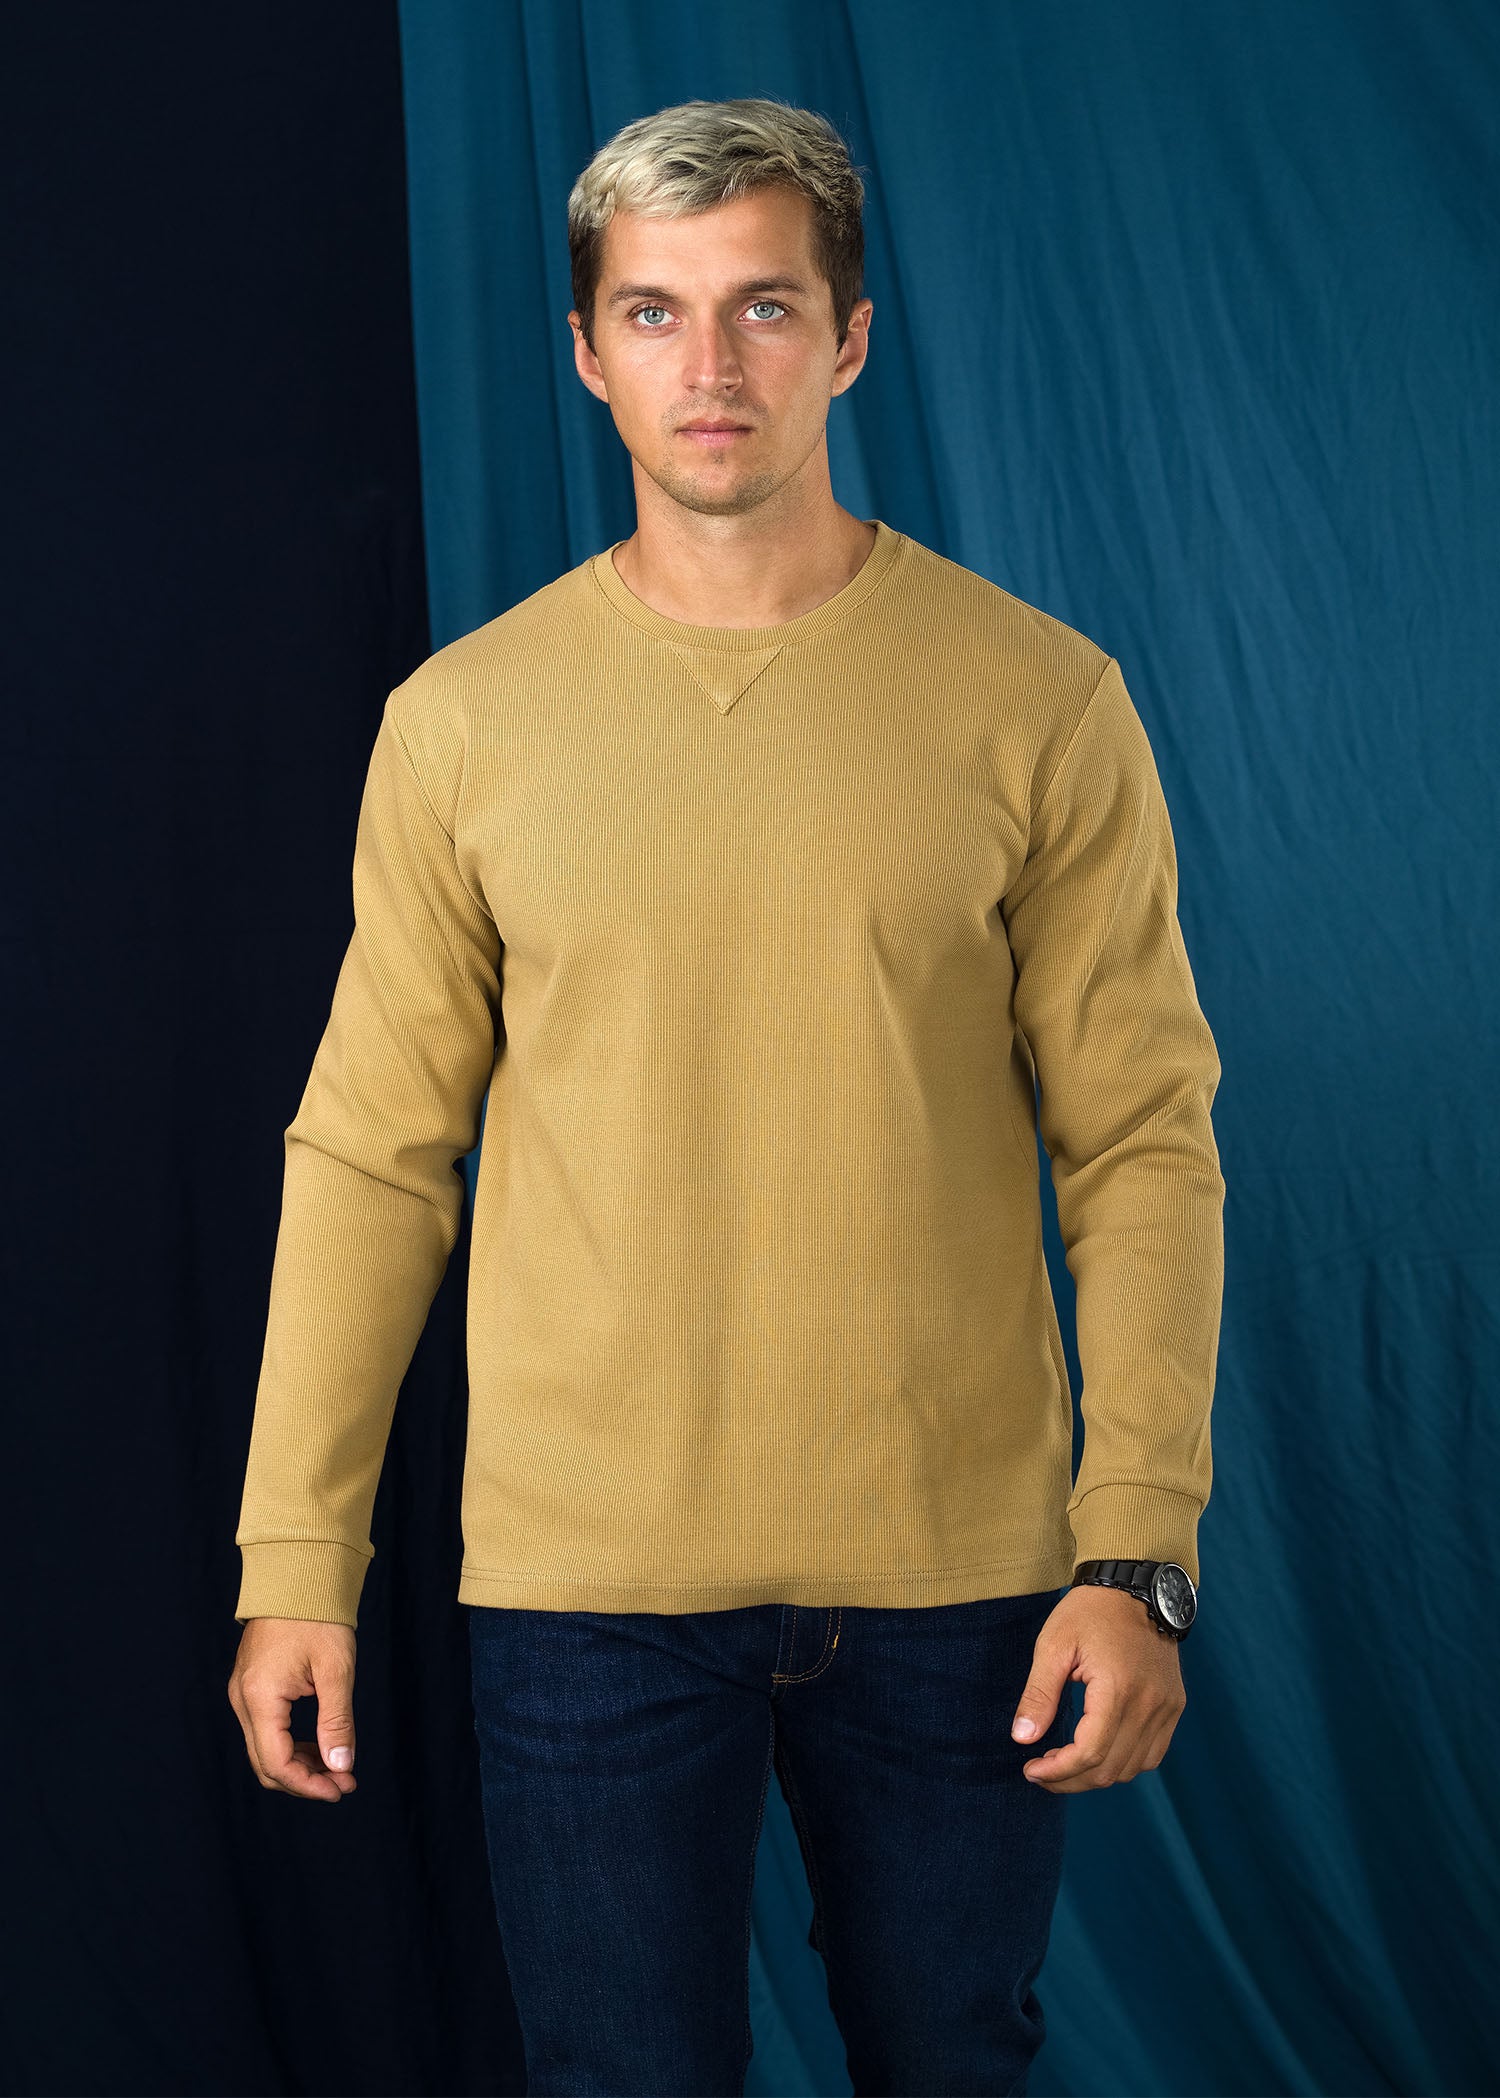 Buy Sweaters in Sri Lanka at best prices online. Carlo clothing Sri Lanka brings you best discounted prices for Sweaters so shop now and get it delivered to your door step.